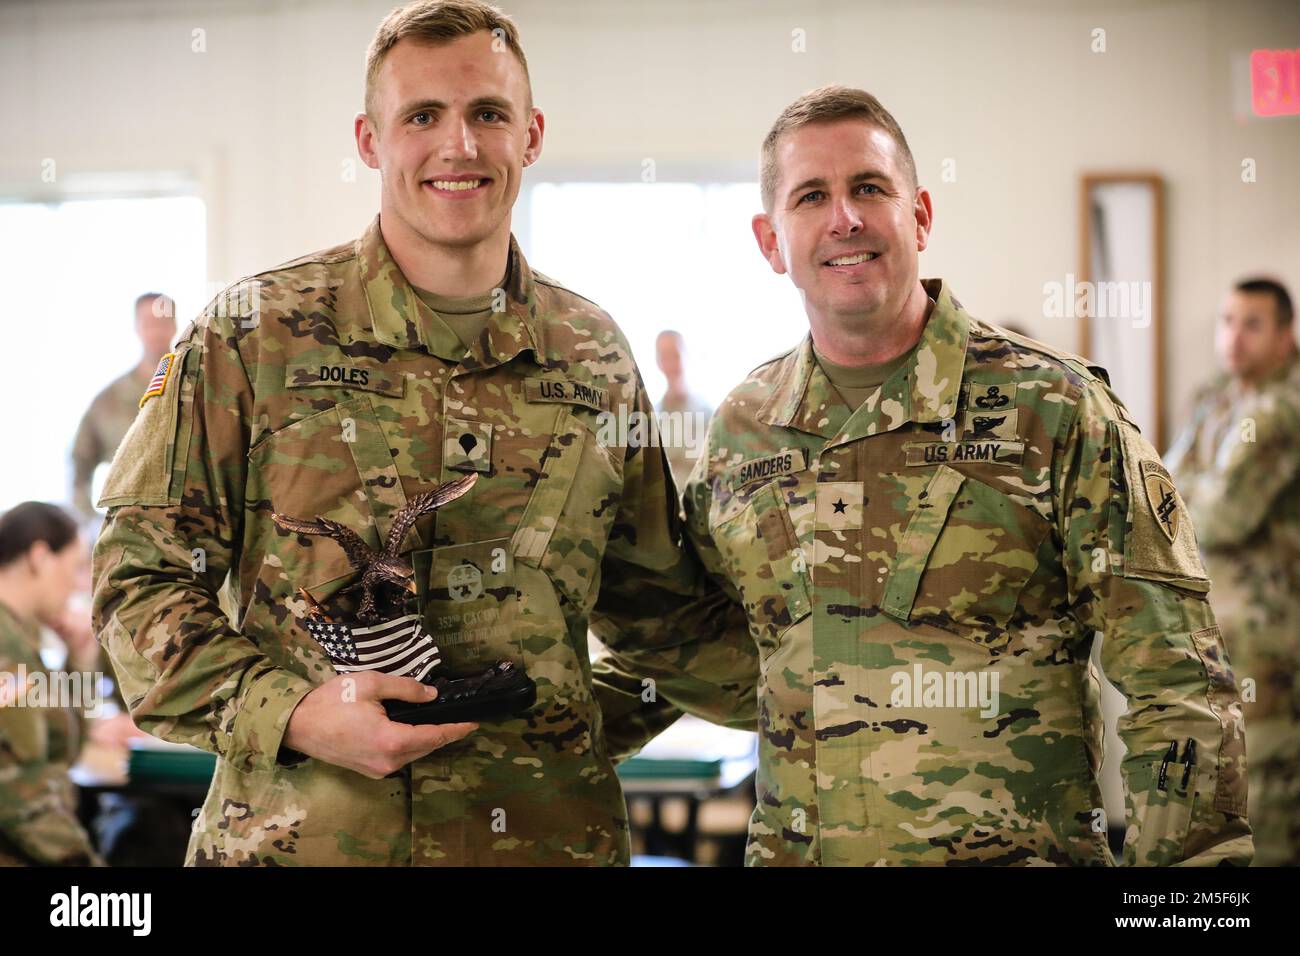 U.S Army Reserve Spc. Thomas Doles, left, a civil affairs specialist with the 489th Civil Affairs Battalion, receives the 352nd Civil Affairs Command’s Soldier of the Year award from Brig. Gen. James Sanders, right, the commanding general of the 352nd Civil Affairs Command, during the 352nd Civil Affairs Command Best Warrior Competition at Fort A.P. Hill, V.A. March 10, 2022. The three-day event challenges competitors to overcome an extensive set of tasks and missions designed to test their warfighting knowledge, physical fitness, battlefield skills in hands-on situational testing, as well as Stock Photo